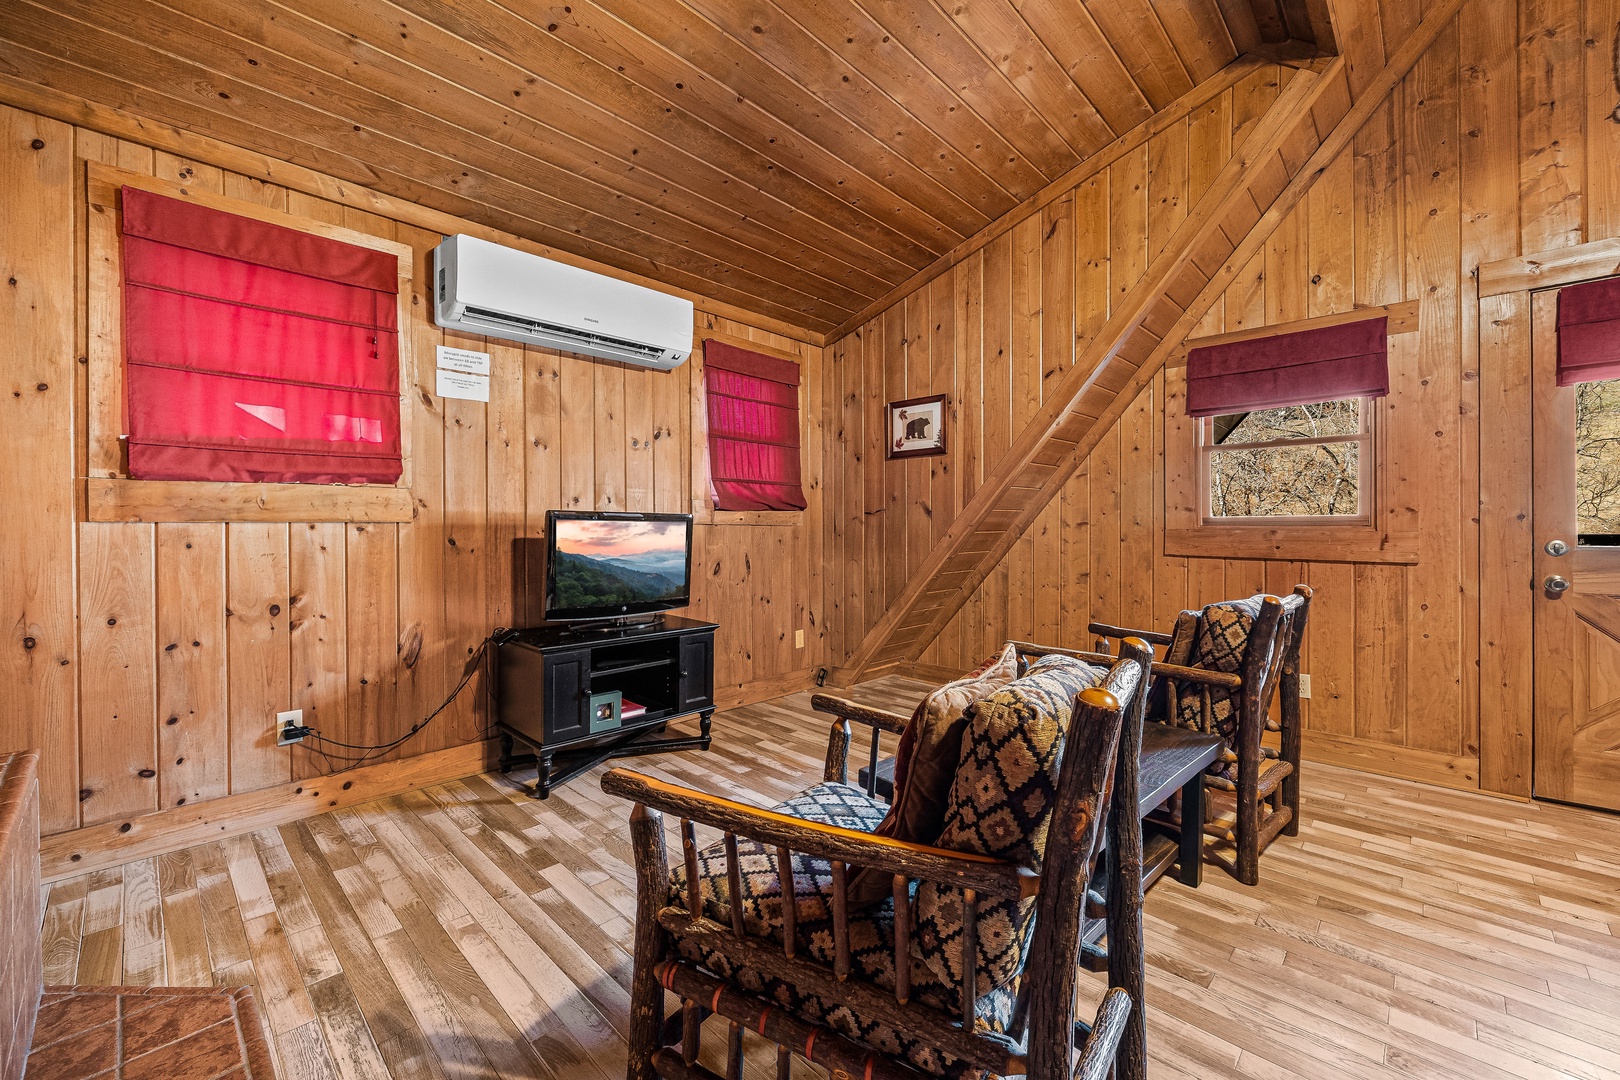 Seating area with TV at A Beary Nice Cabin, a 2 bedroom cabin rental located in Pigeon Forge